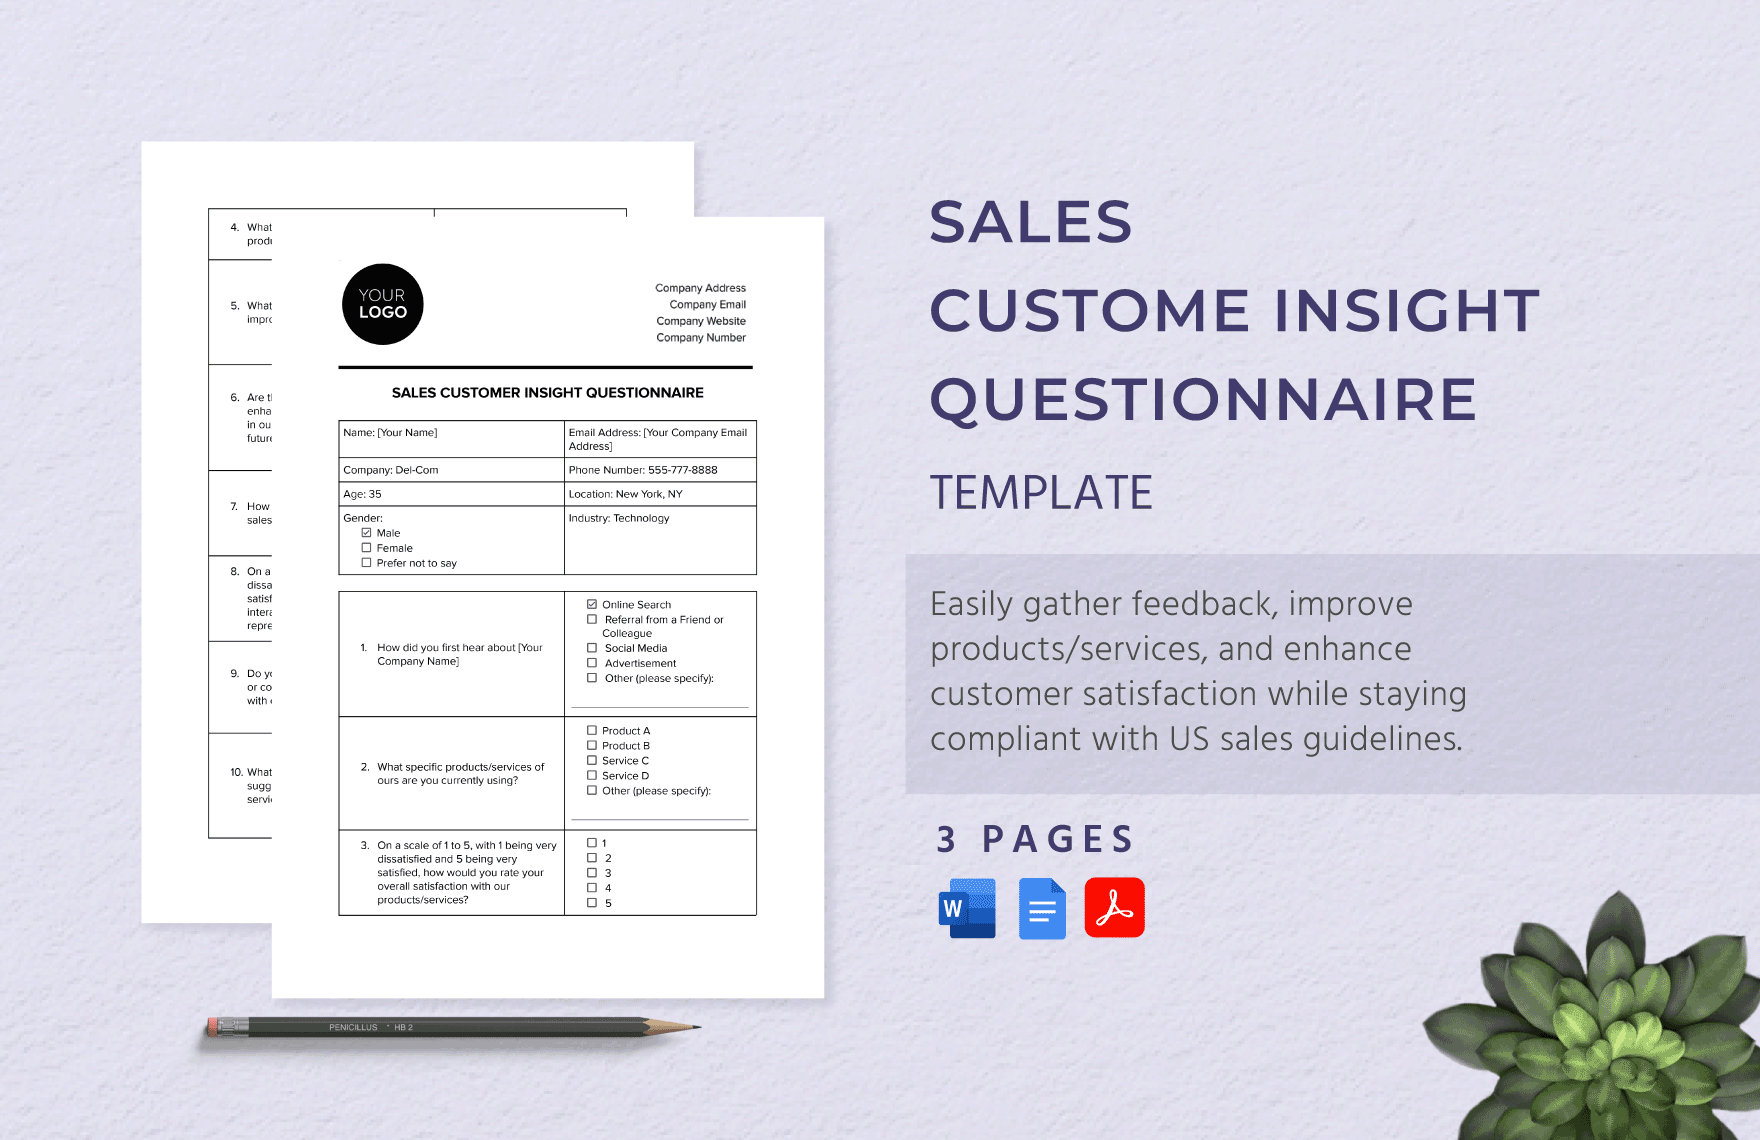 Sales Customer Insight Questionnaire Template in Word, Google Docs, PDF